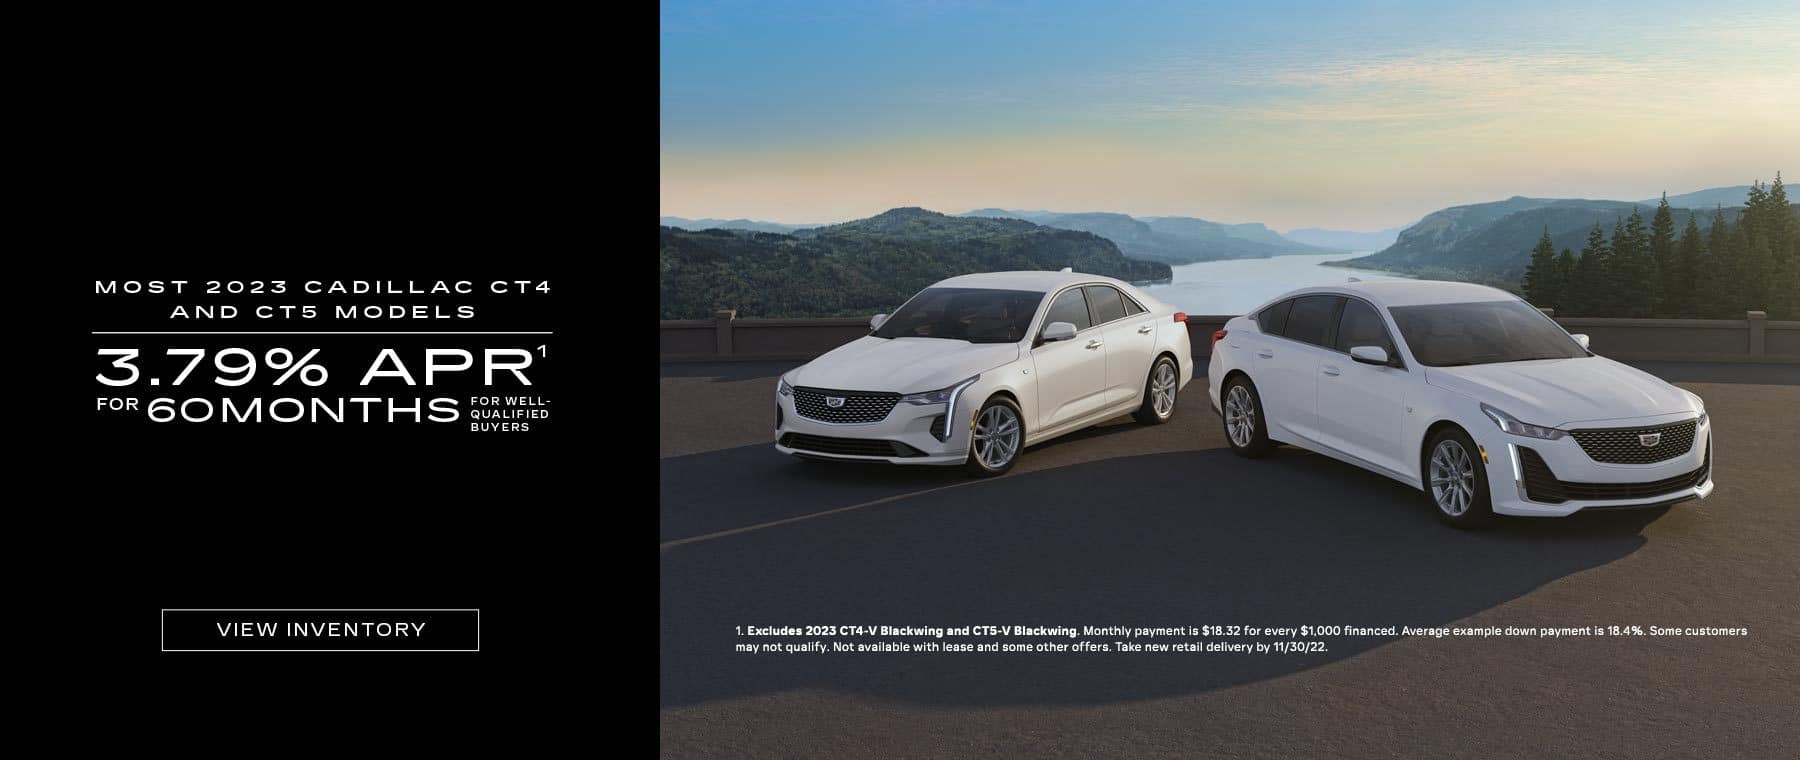 MOST 2023 CADILLAC CT4 AND CT5 MODELS. 3.79% APR for 60 months for well-qualified buyers.